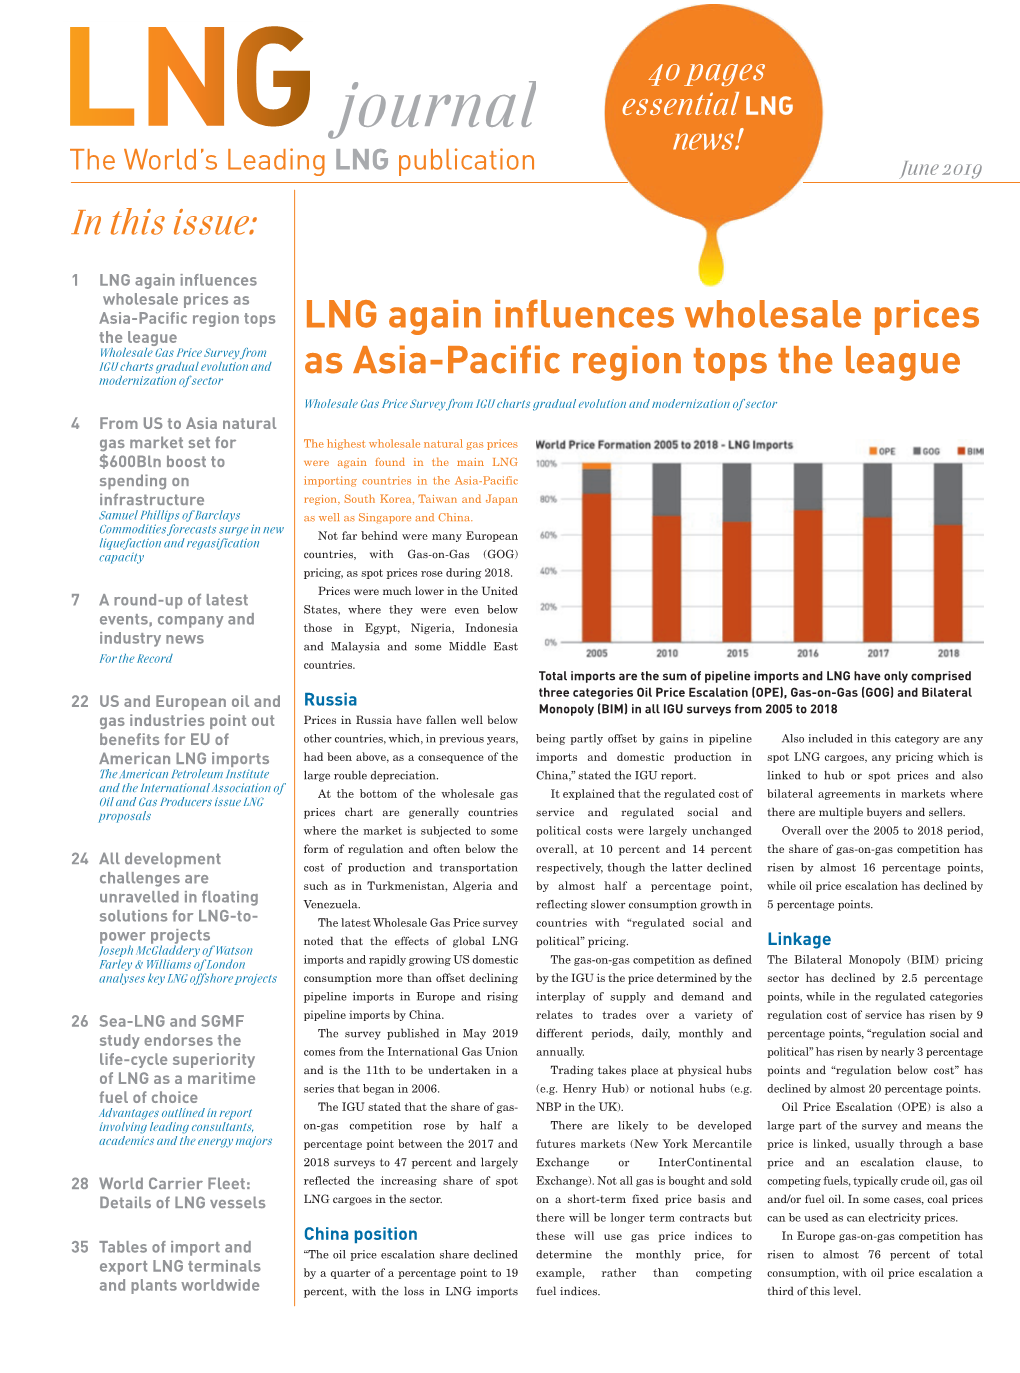 LNG Again Influences Wholesale Prices As Asia-Pacific Region Tops the League